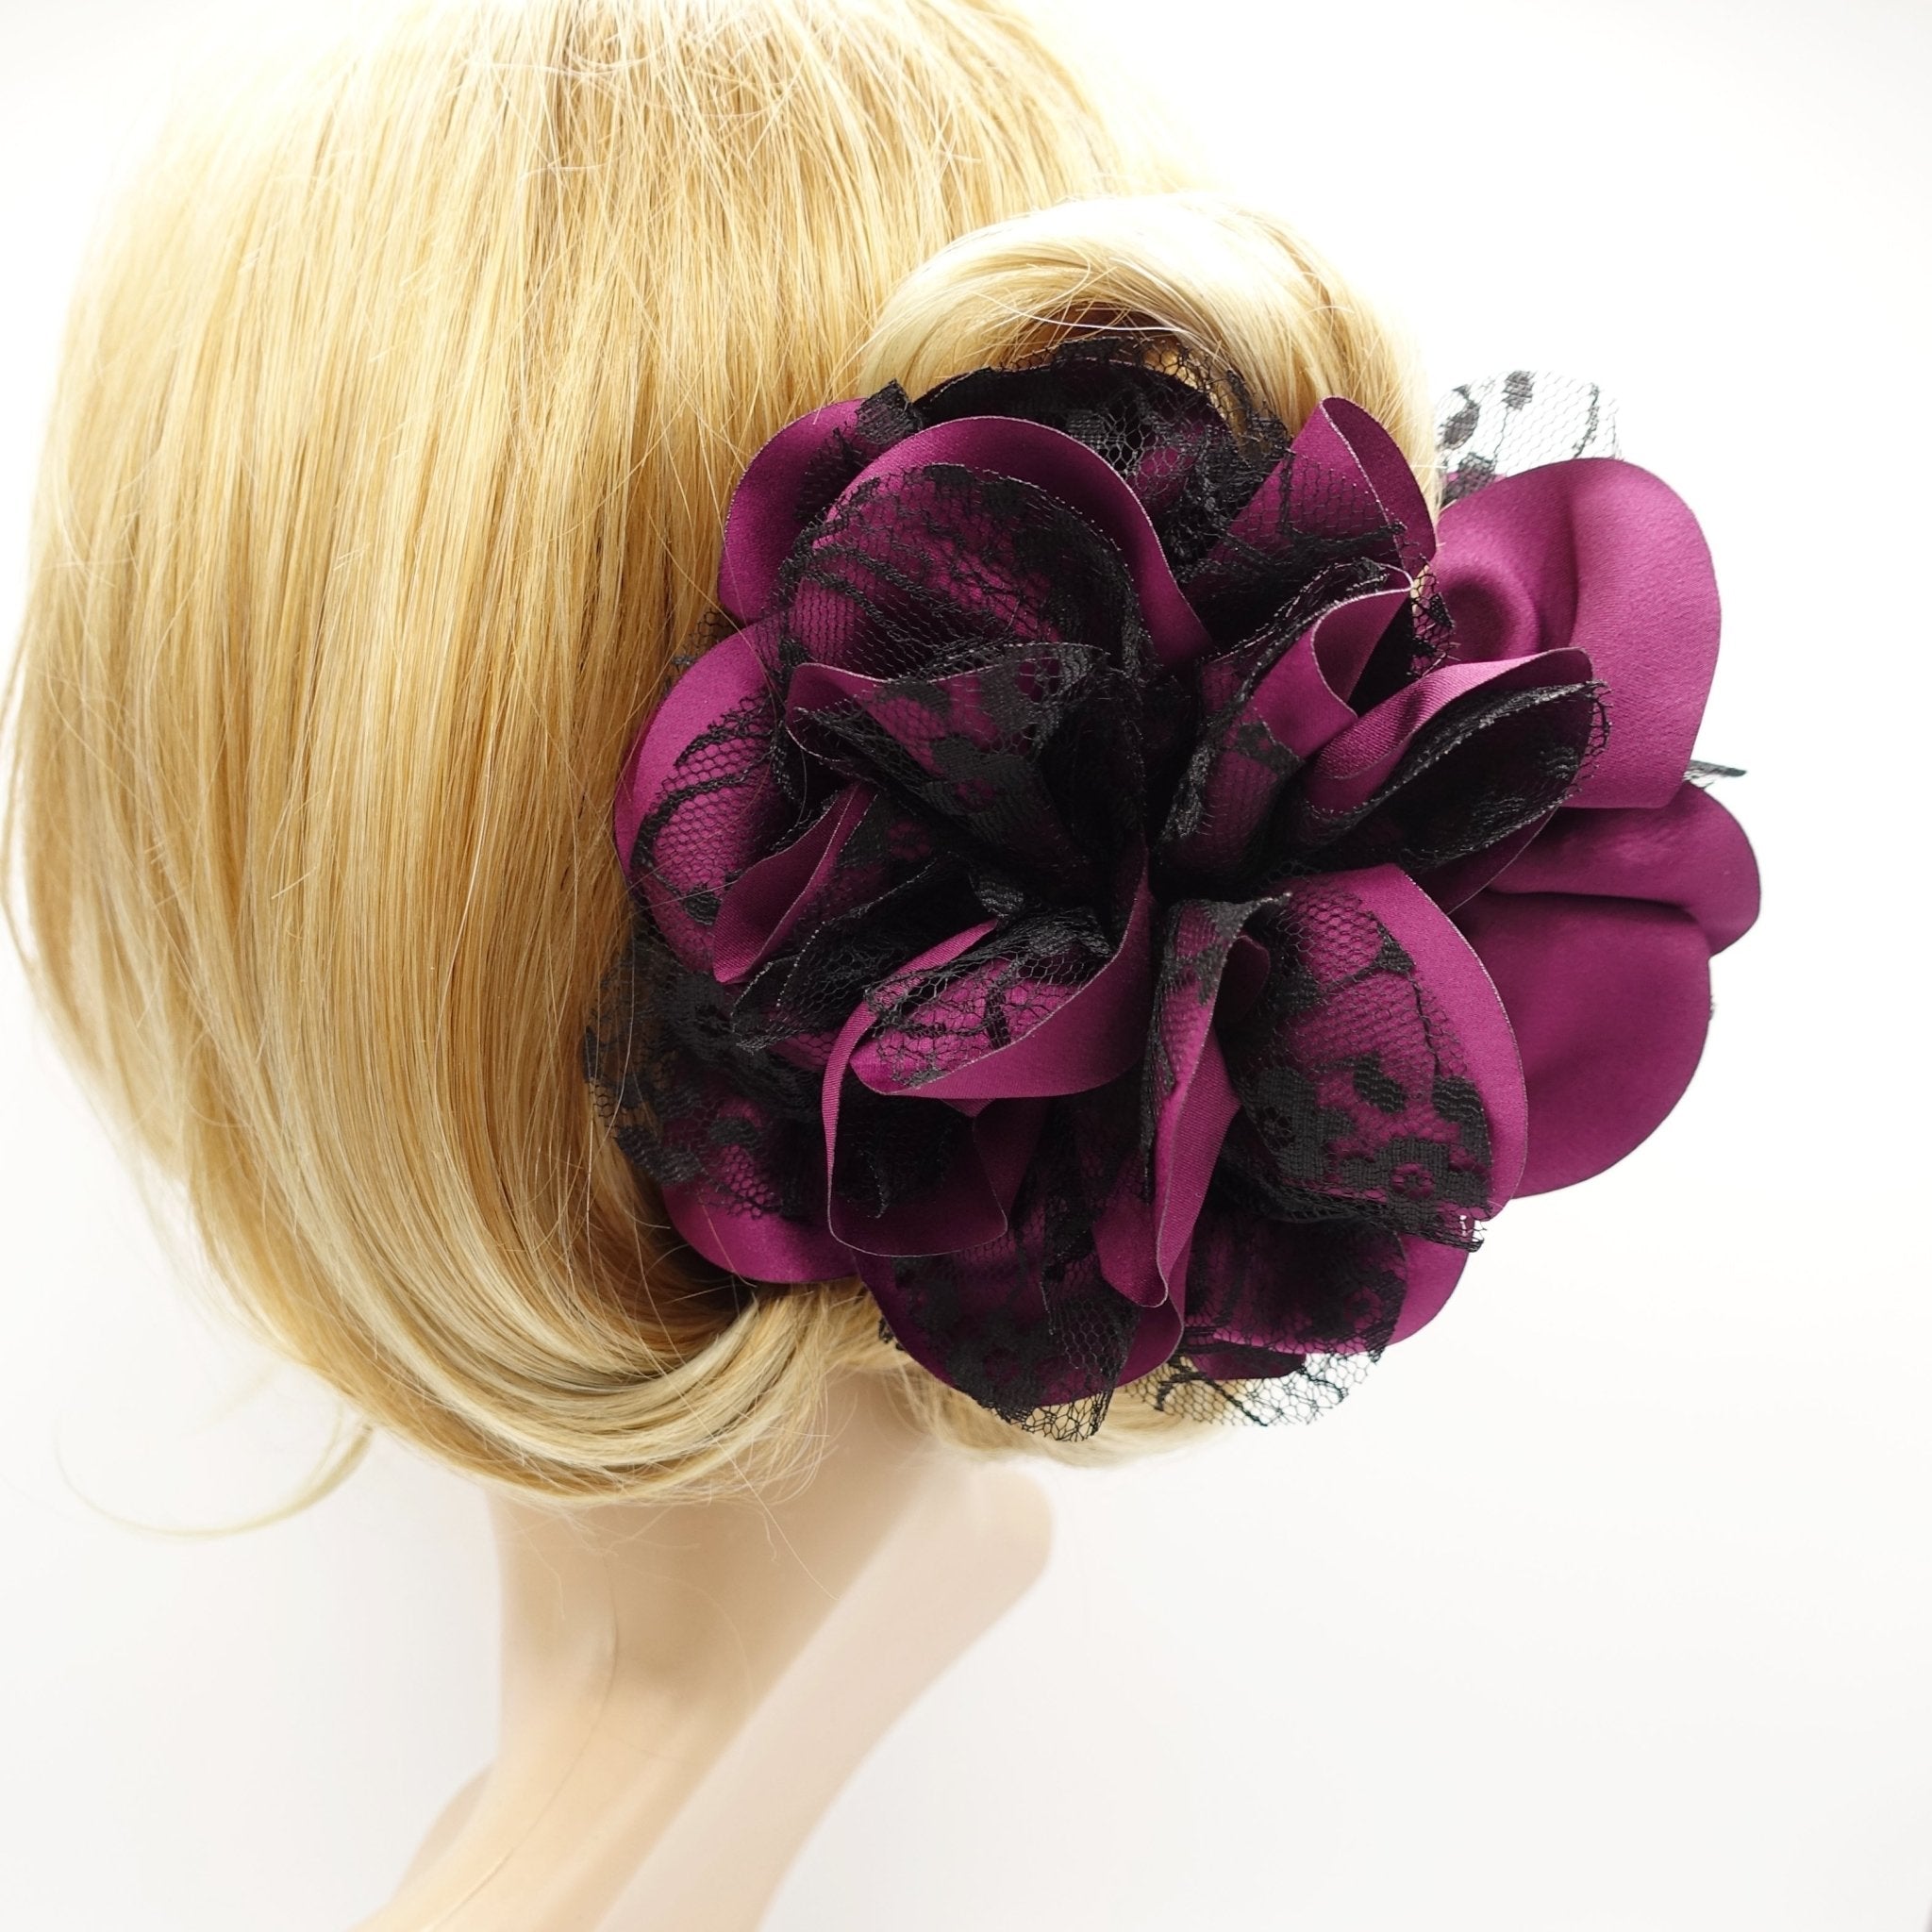 Introducing the Flower Hair Claw: The Perfect Hair Accessory for Every Occasion